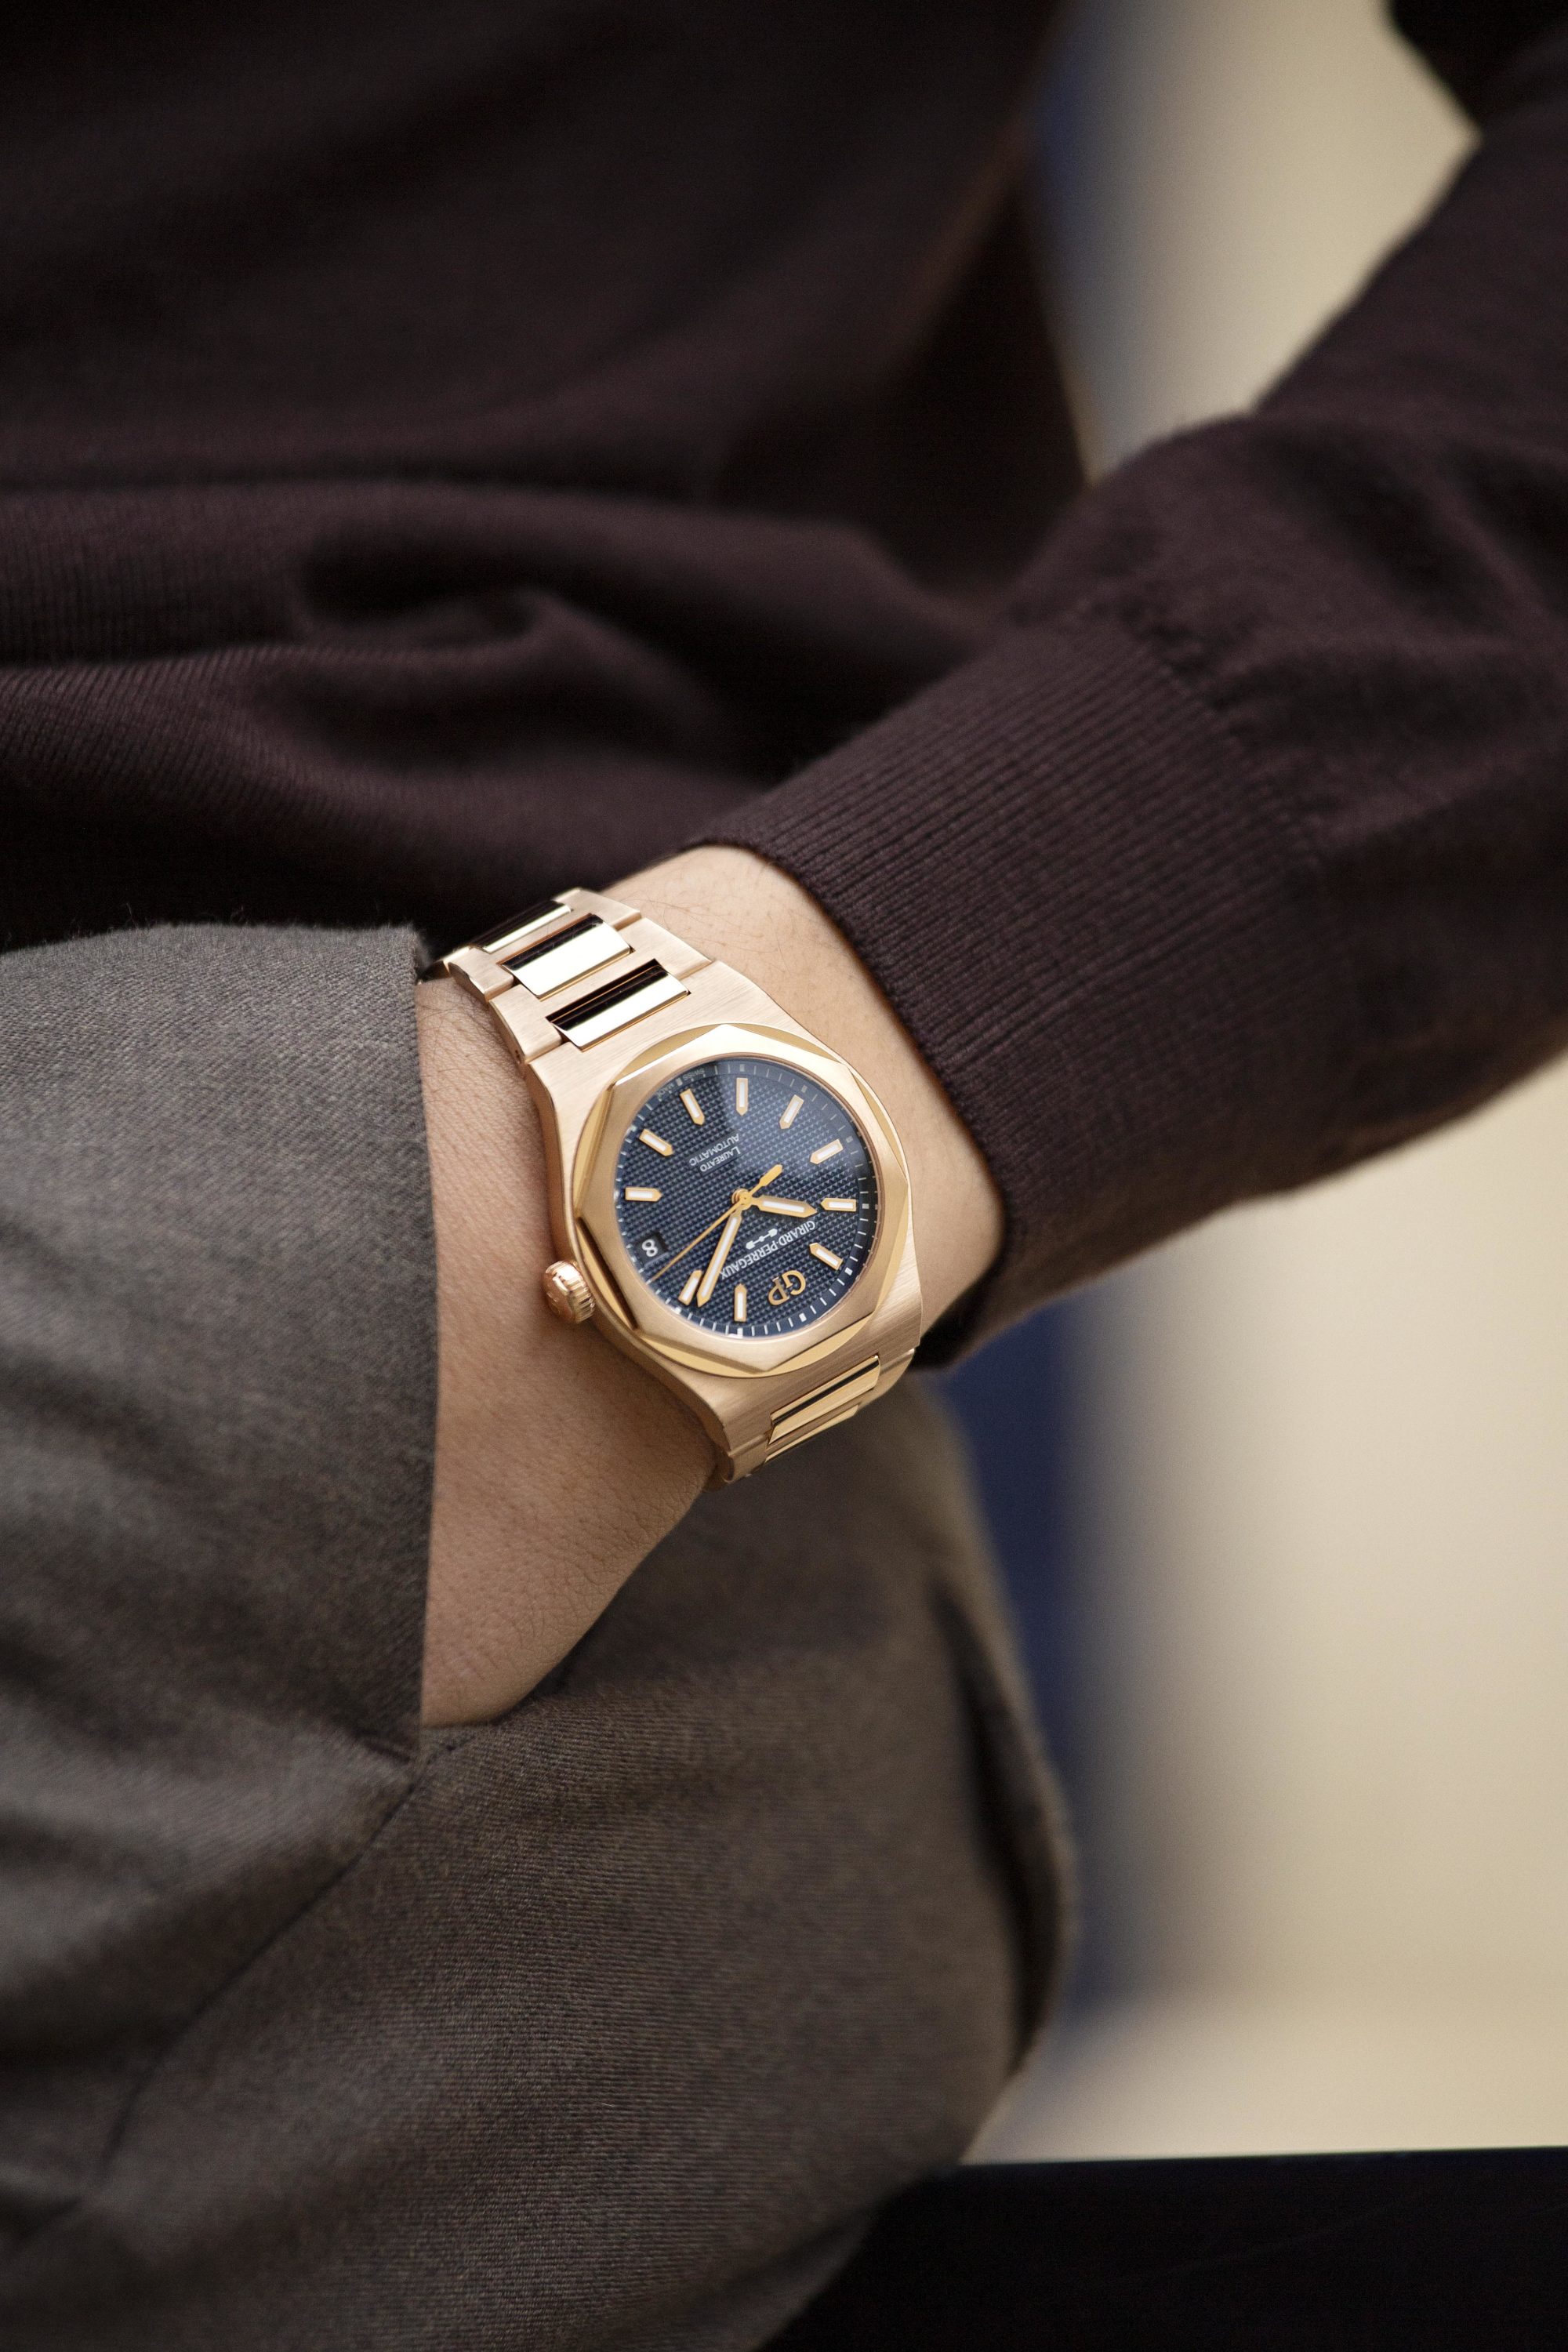 Green and Blue Dials Meet Pink Gold in Girard-Perregaux’s Latest Laureato Models